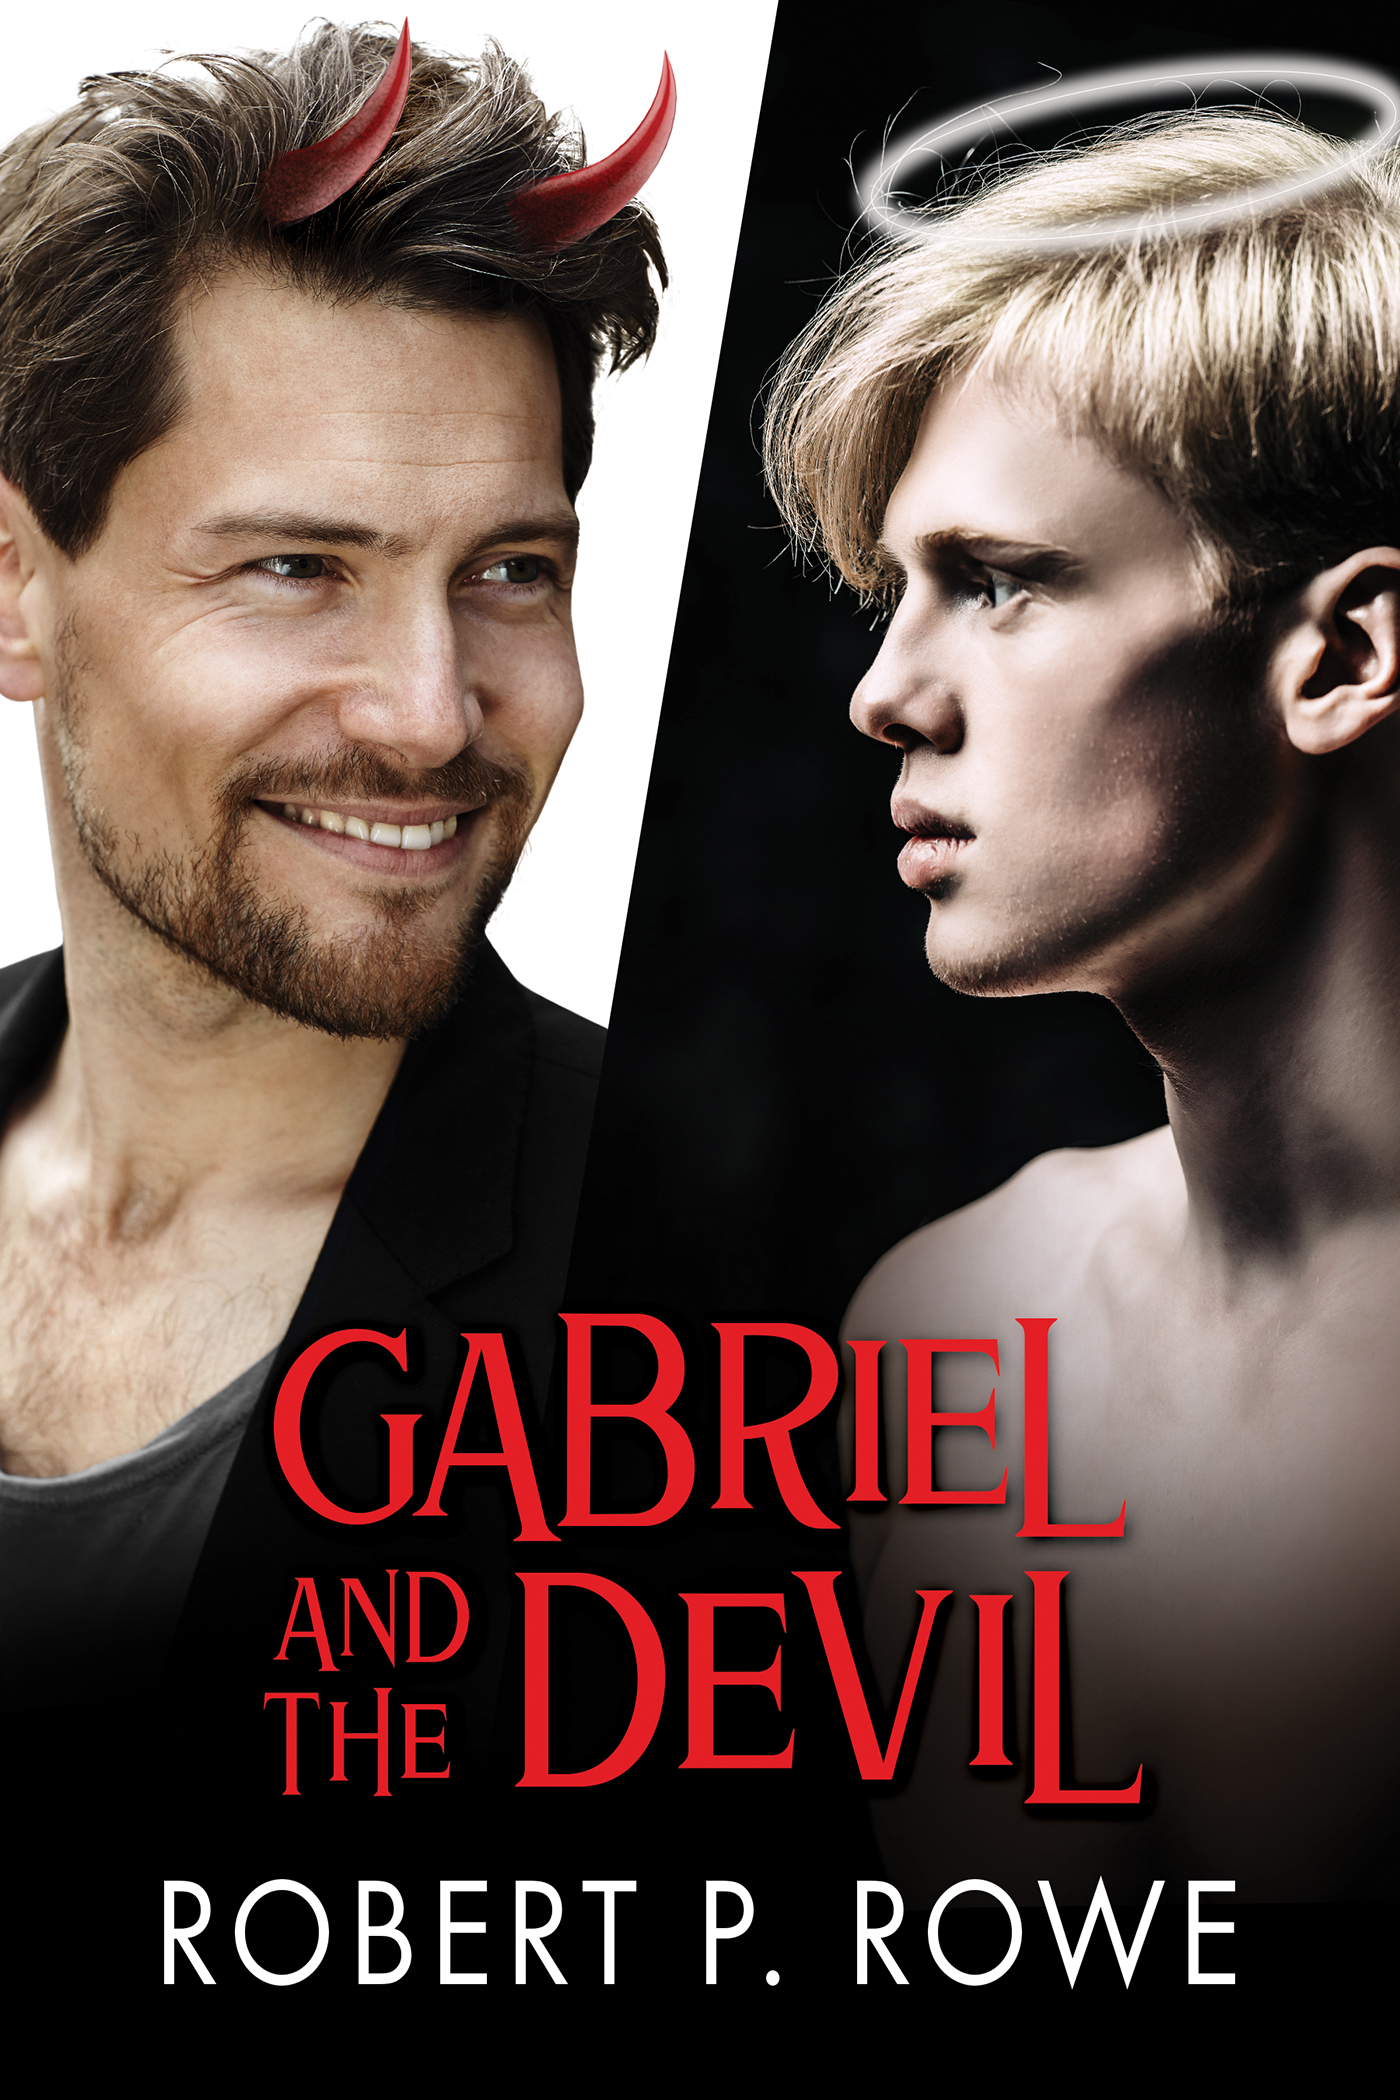 This image is the cover for the book Gabriel and the Devil